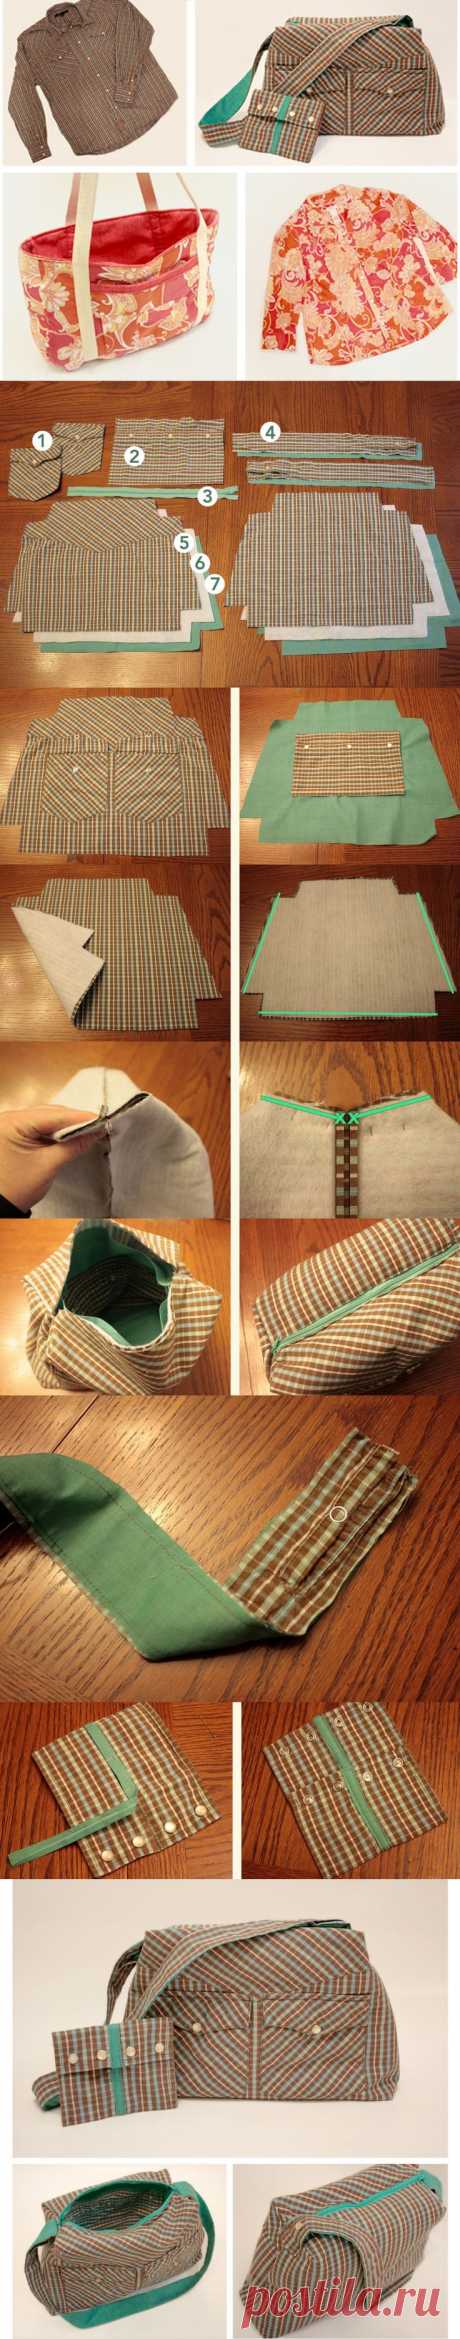 Upcycle blouses and shirts into purses. - Picmia